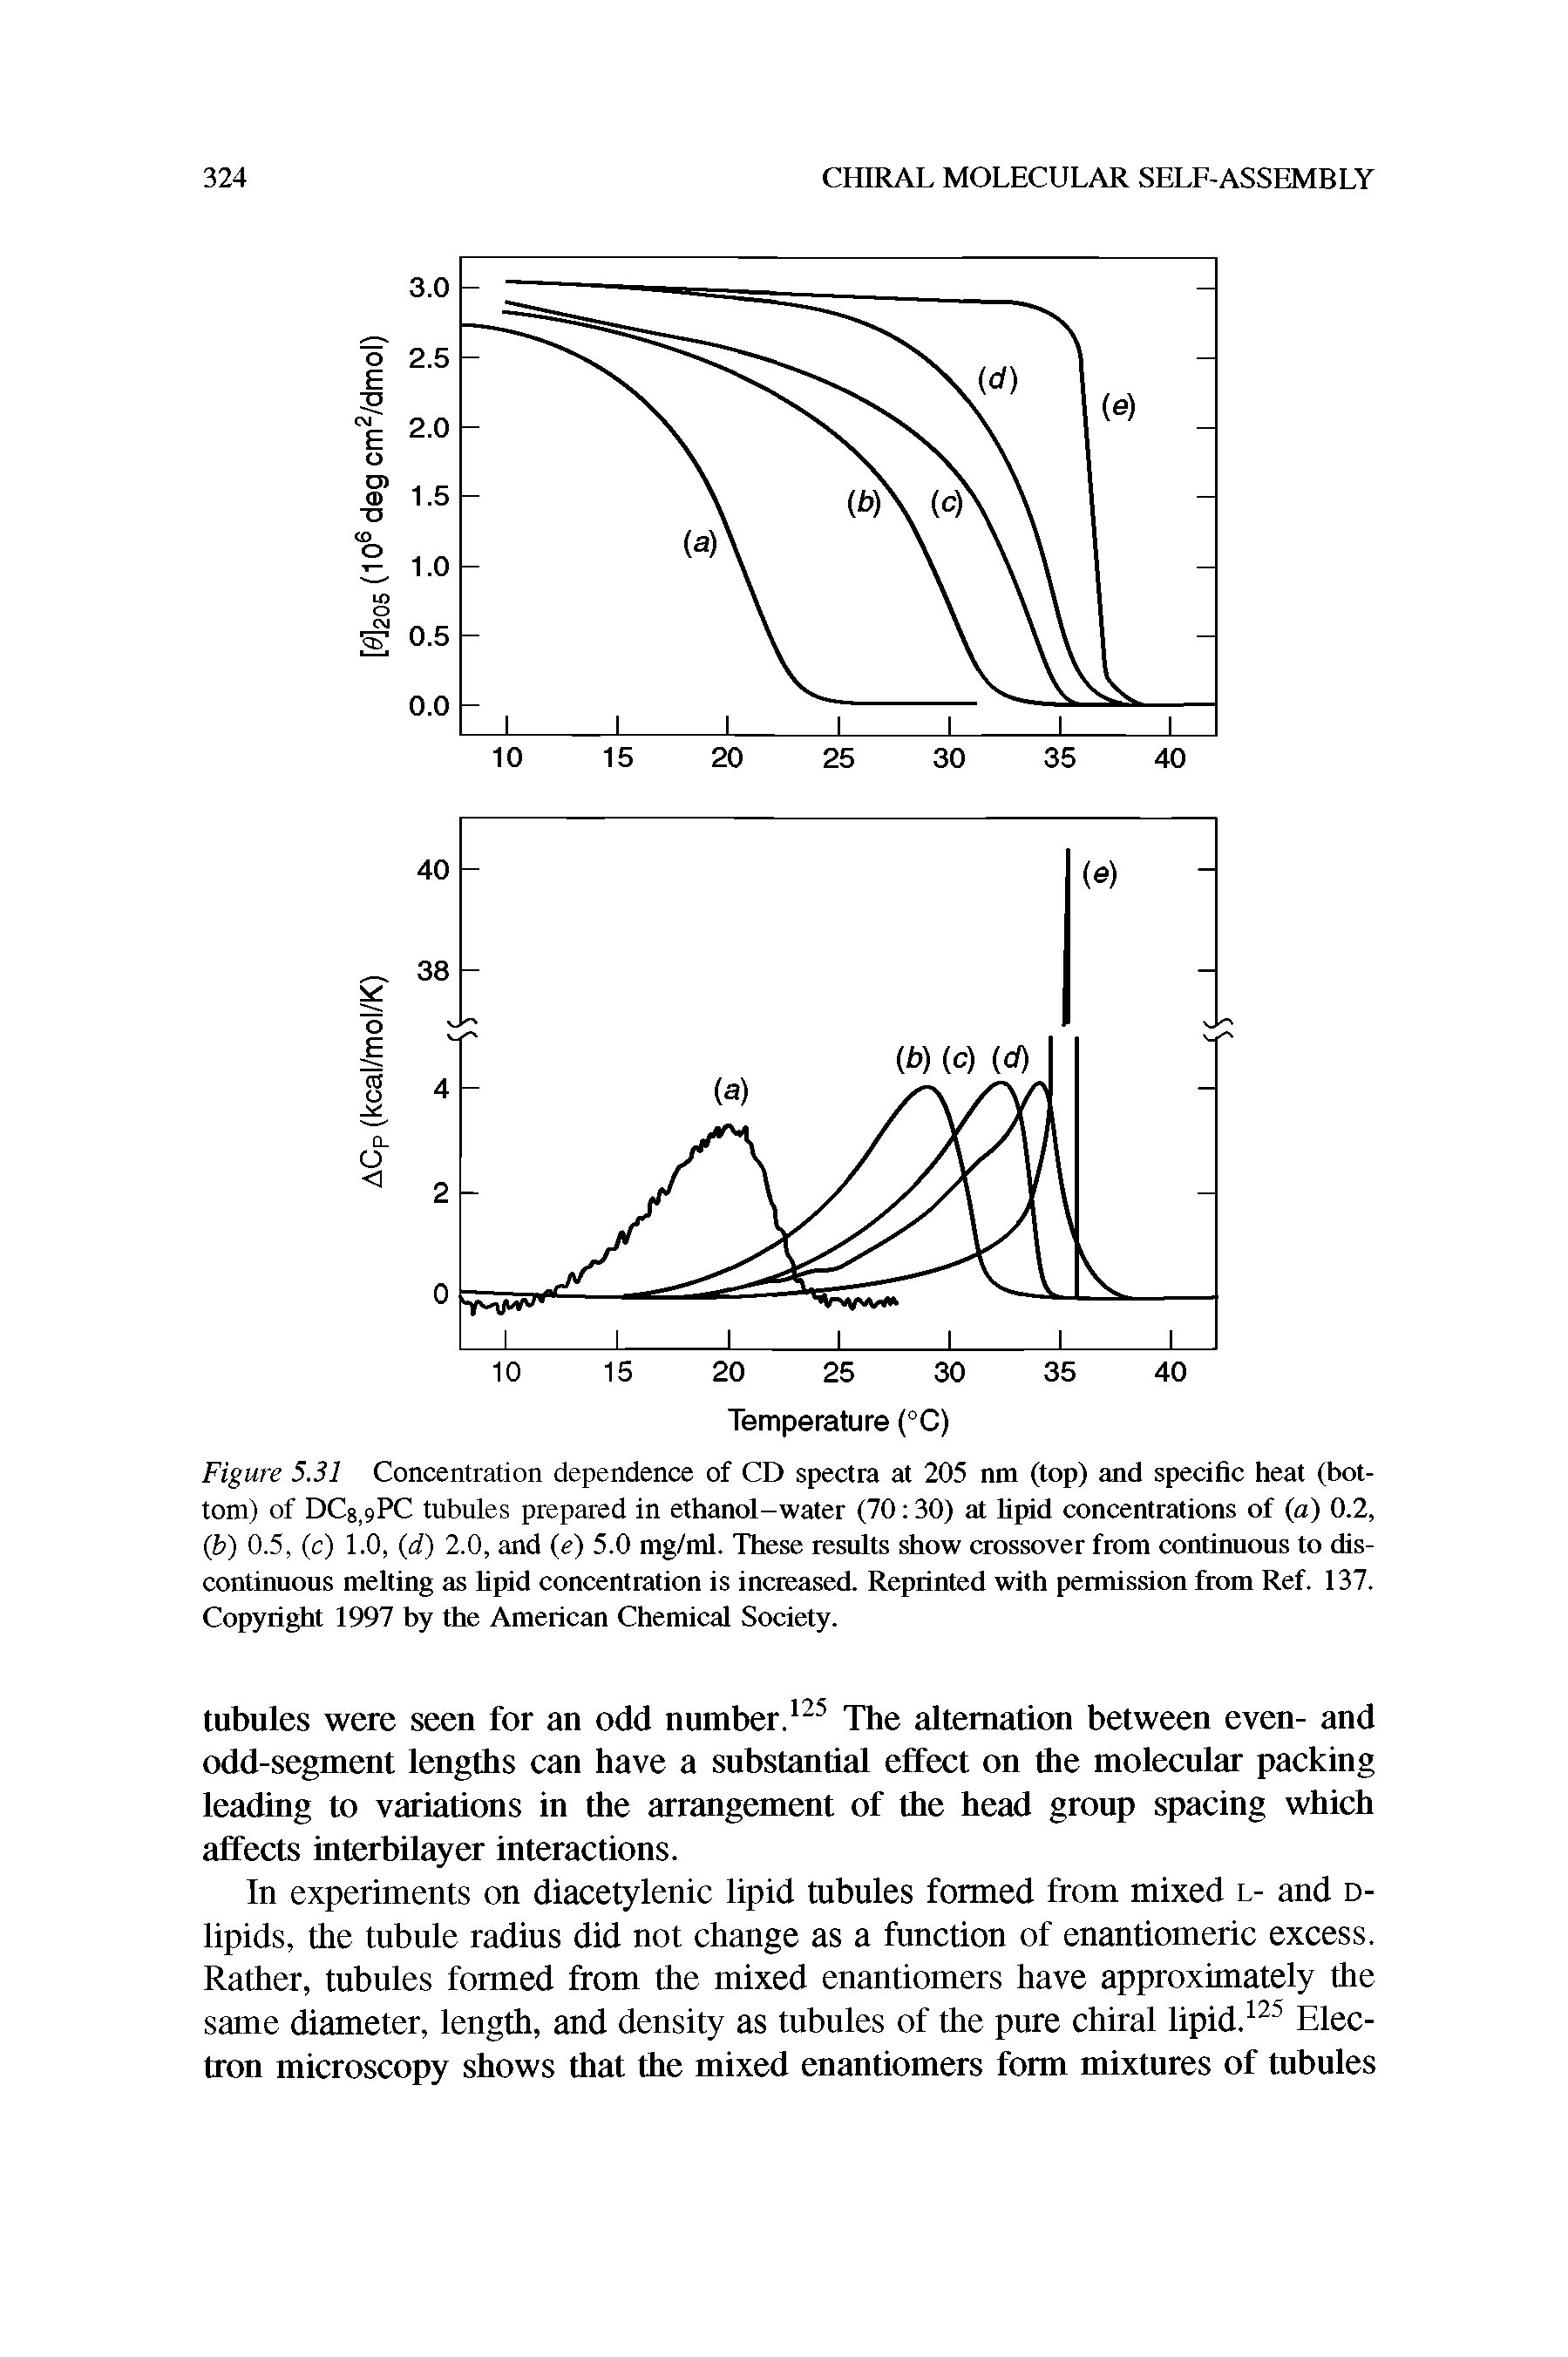 Figure 5.31 Concentration dependence of CD spectra at 205 nm (top) and specific heat (bottom) of DCg.gPC tubules prepared in ethanol-water (70 30) at lipid concentrations of (a) 0.2, (b) 0.5, (c) 1.0, (d) 2.0, and (e) 5.0 mg/ml. These results show crossover from continuous to discontinuous melting as lipid concentration is increased. Reprinted with permission from Ref. 137. Copyright 1997 by the American Chemical Society.